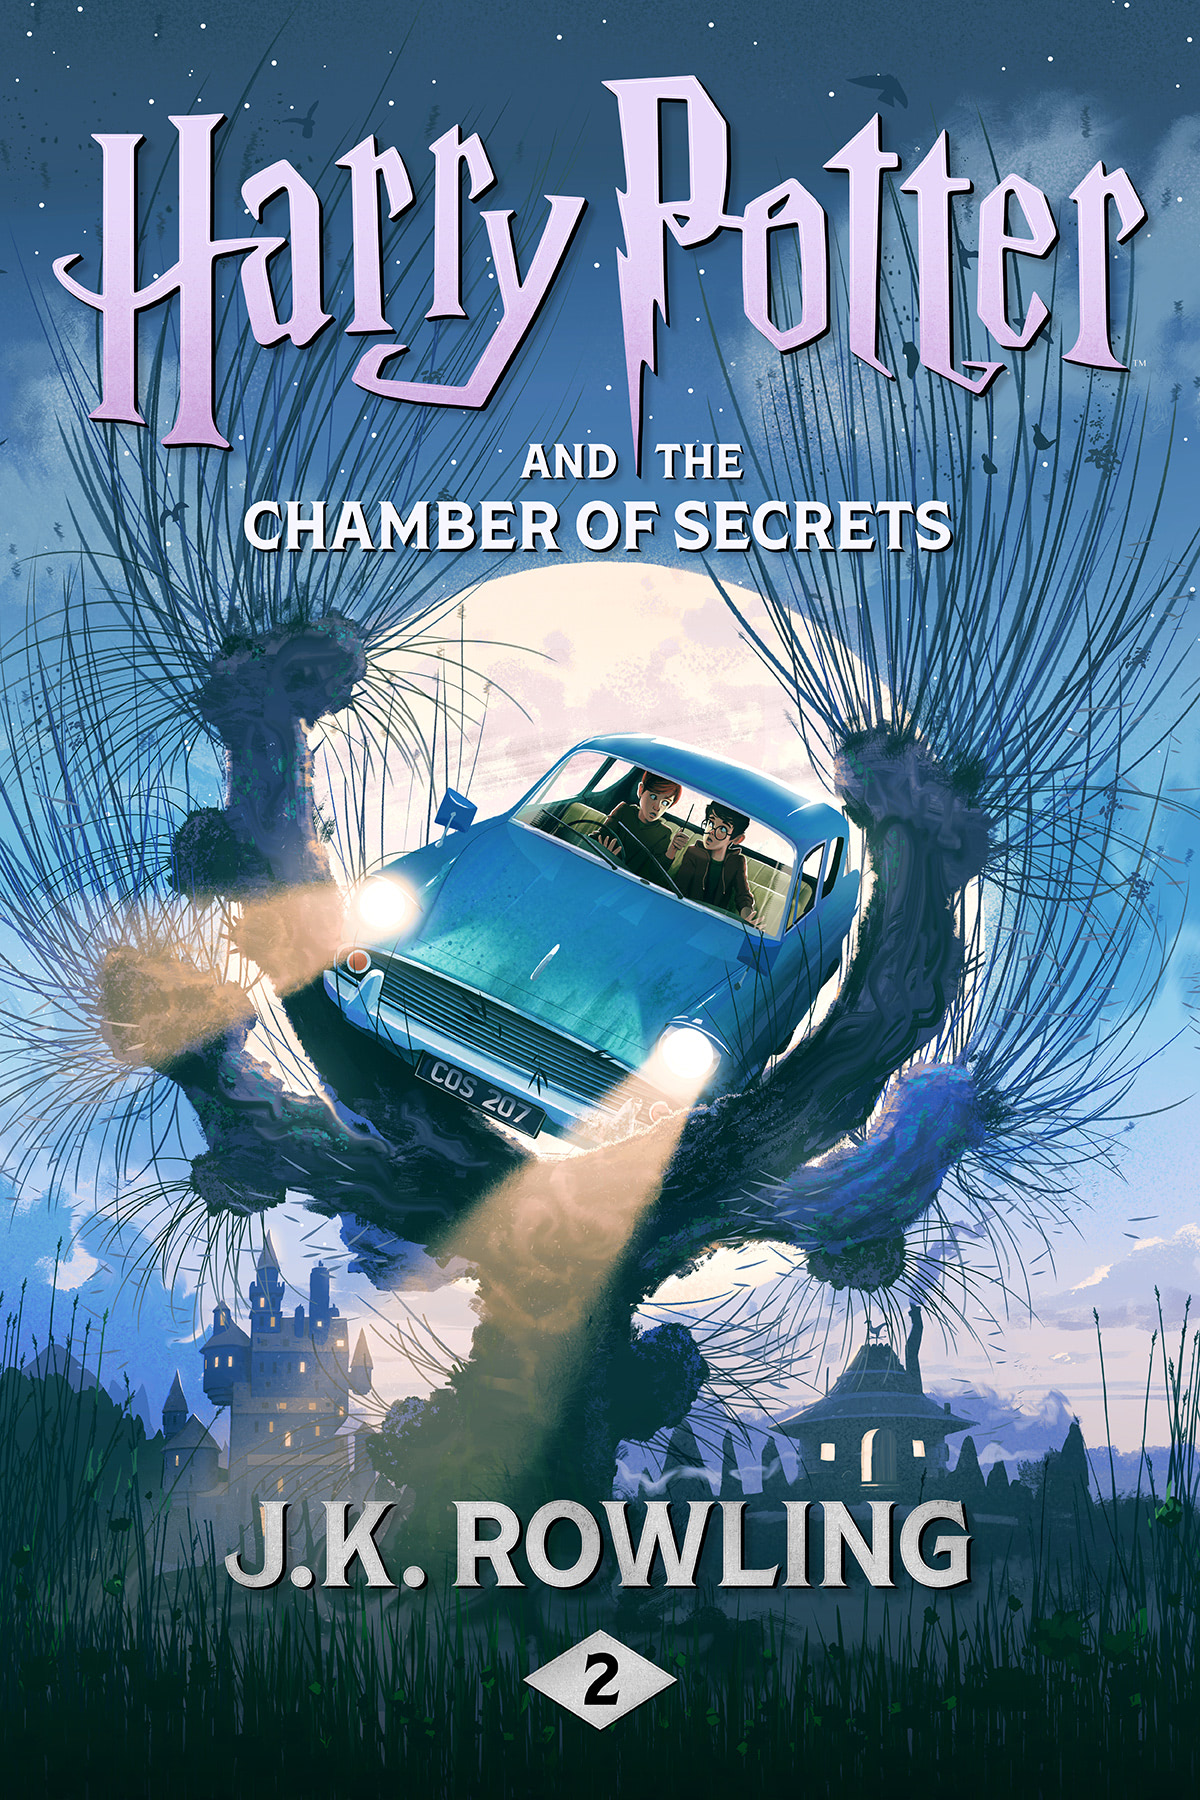 ‘Chamber of Secrets’ 2022 Pottermore eBook/audiobook cover